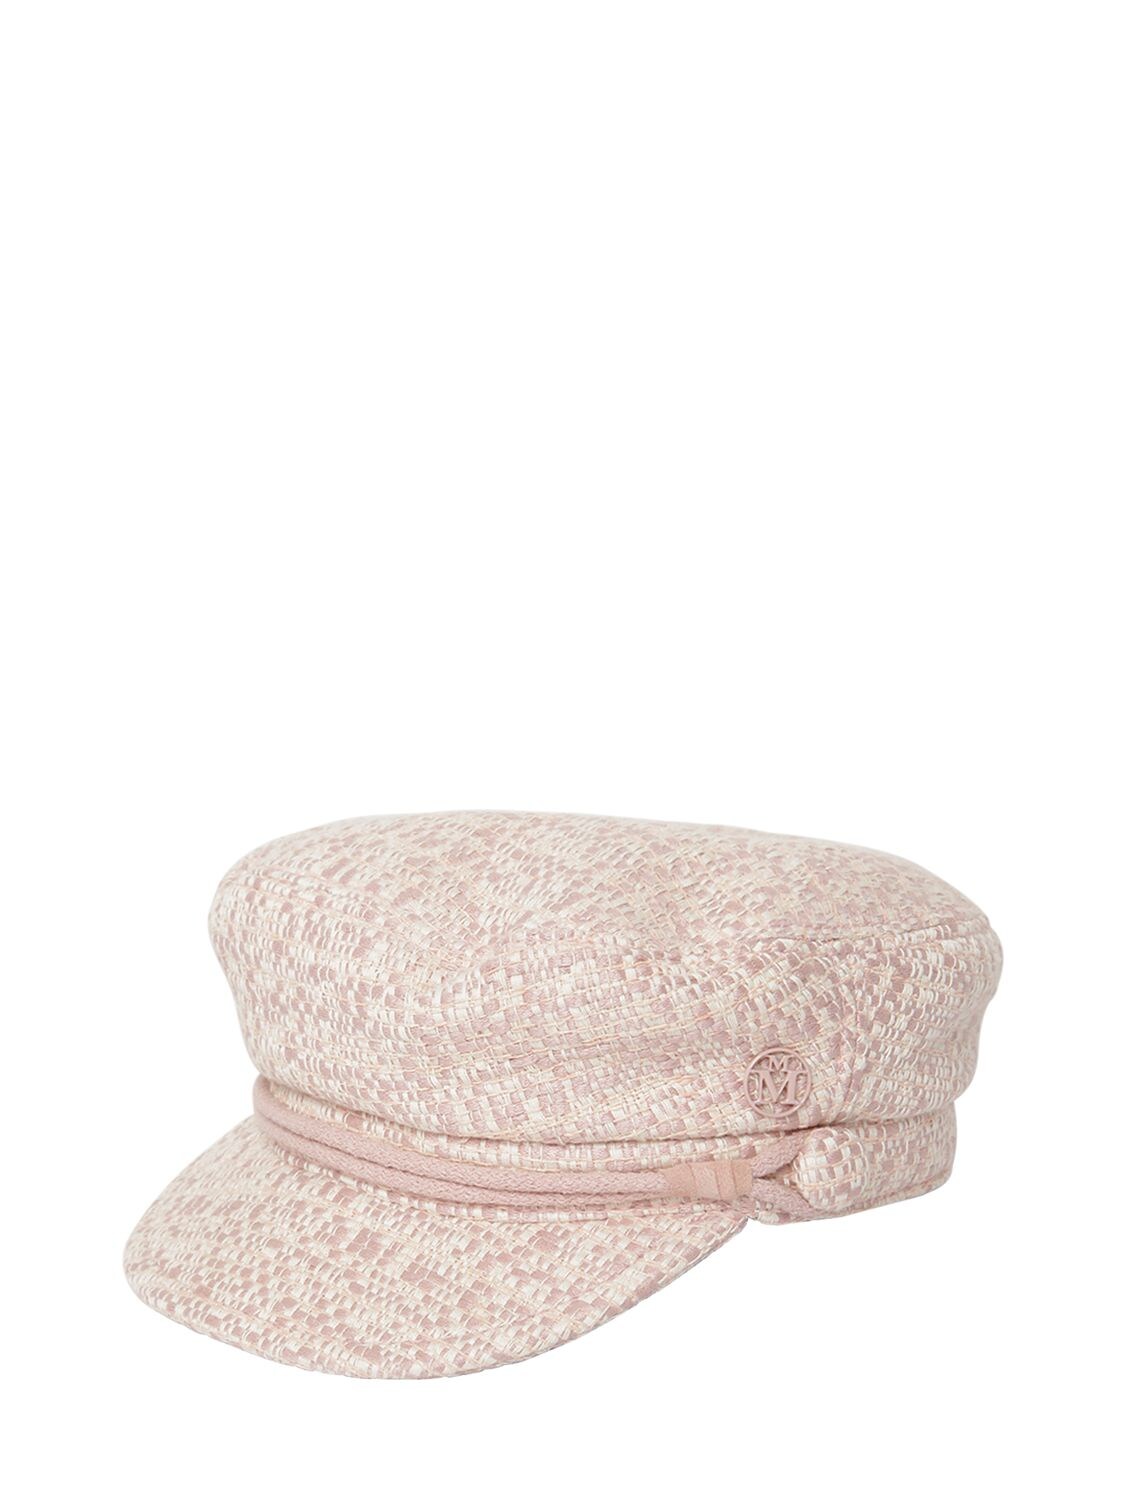 Maison Michel New Abby Acrylic & Silk Tweed Hat In Pink